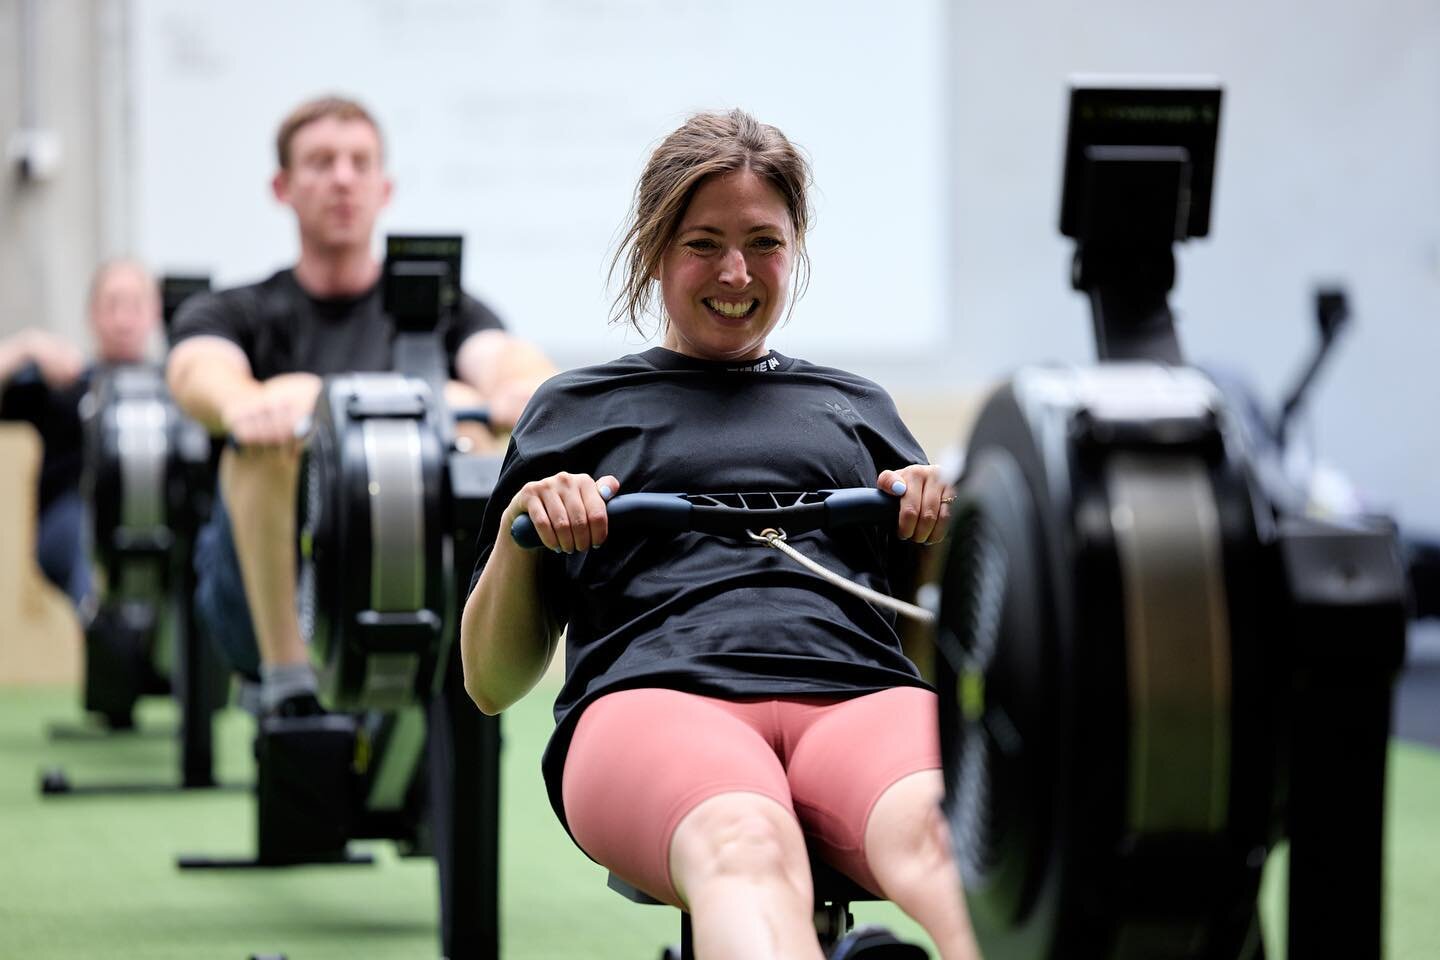 Professional, hands on and quality coaching is what you&rsquo;ll get at Outland 👌 Don&rsquo;t expect to be thrown in the deep end at our group sessions. We&rsquo;re all about being scalable and accommodating for every fitness level and capability. 
